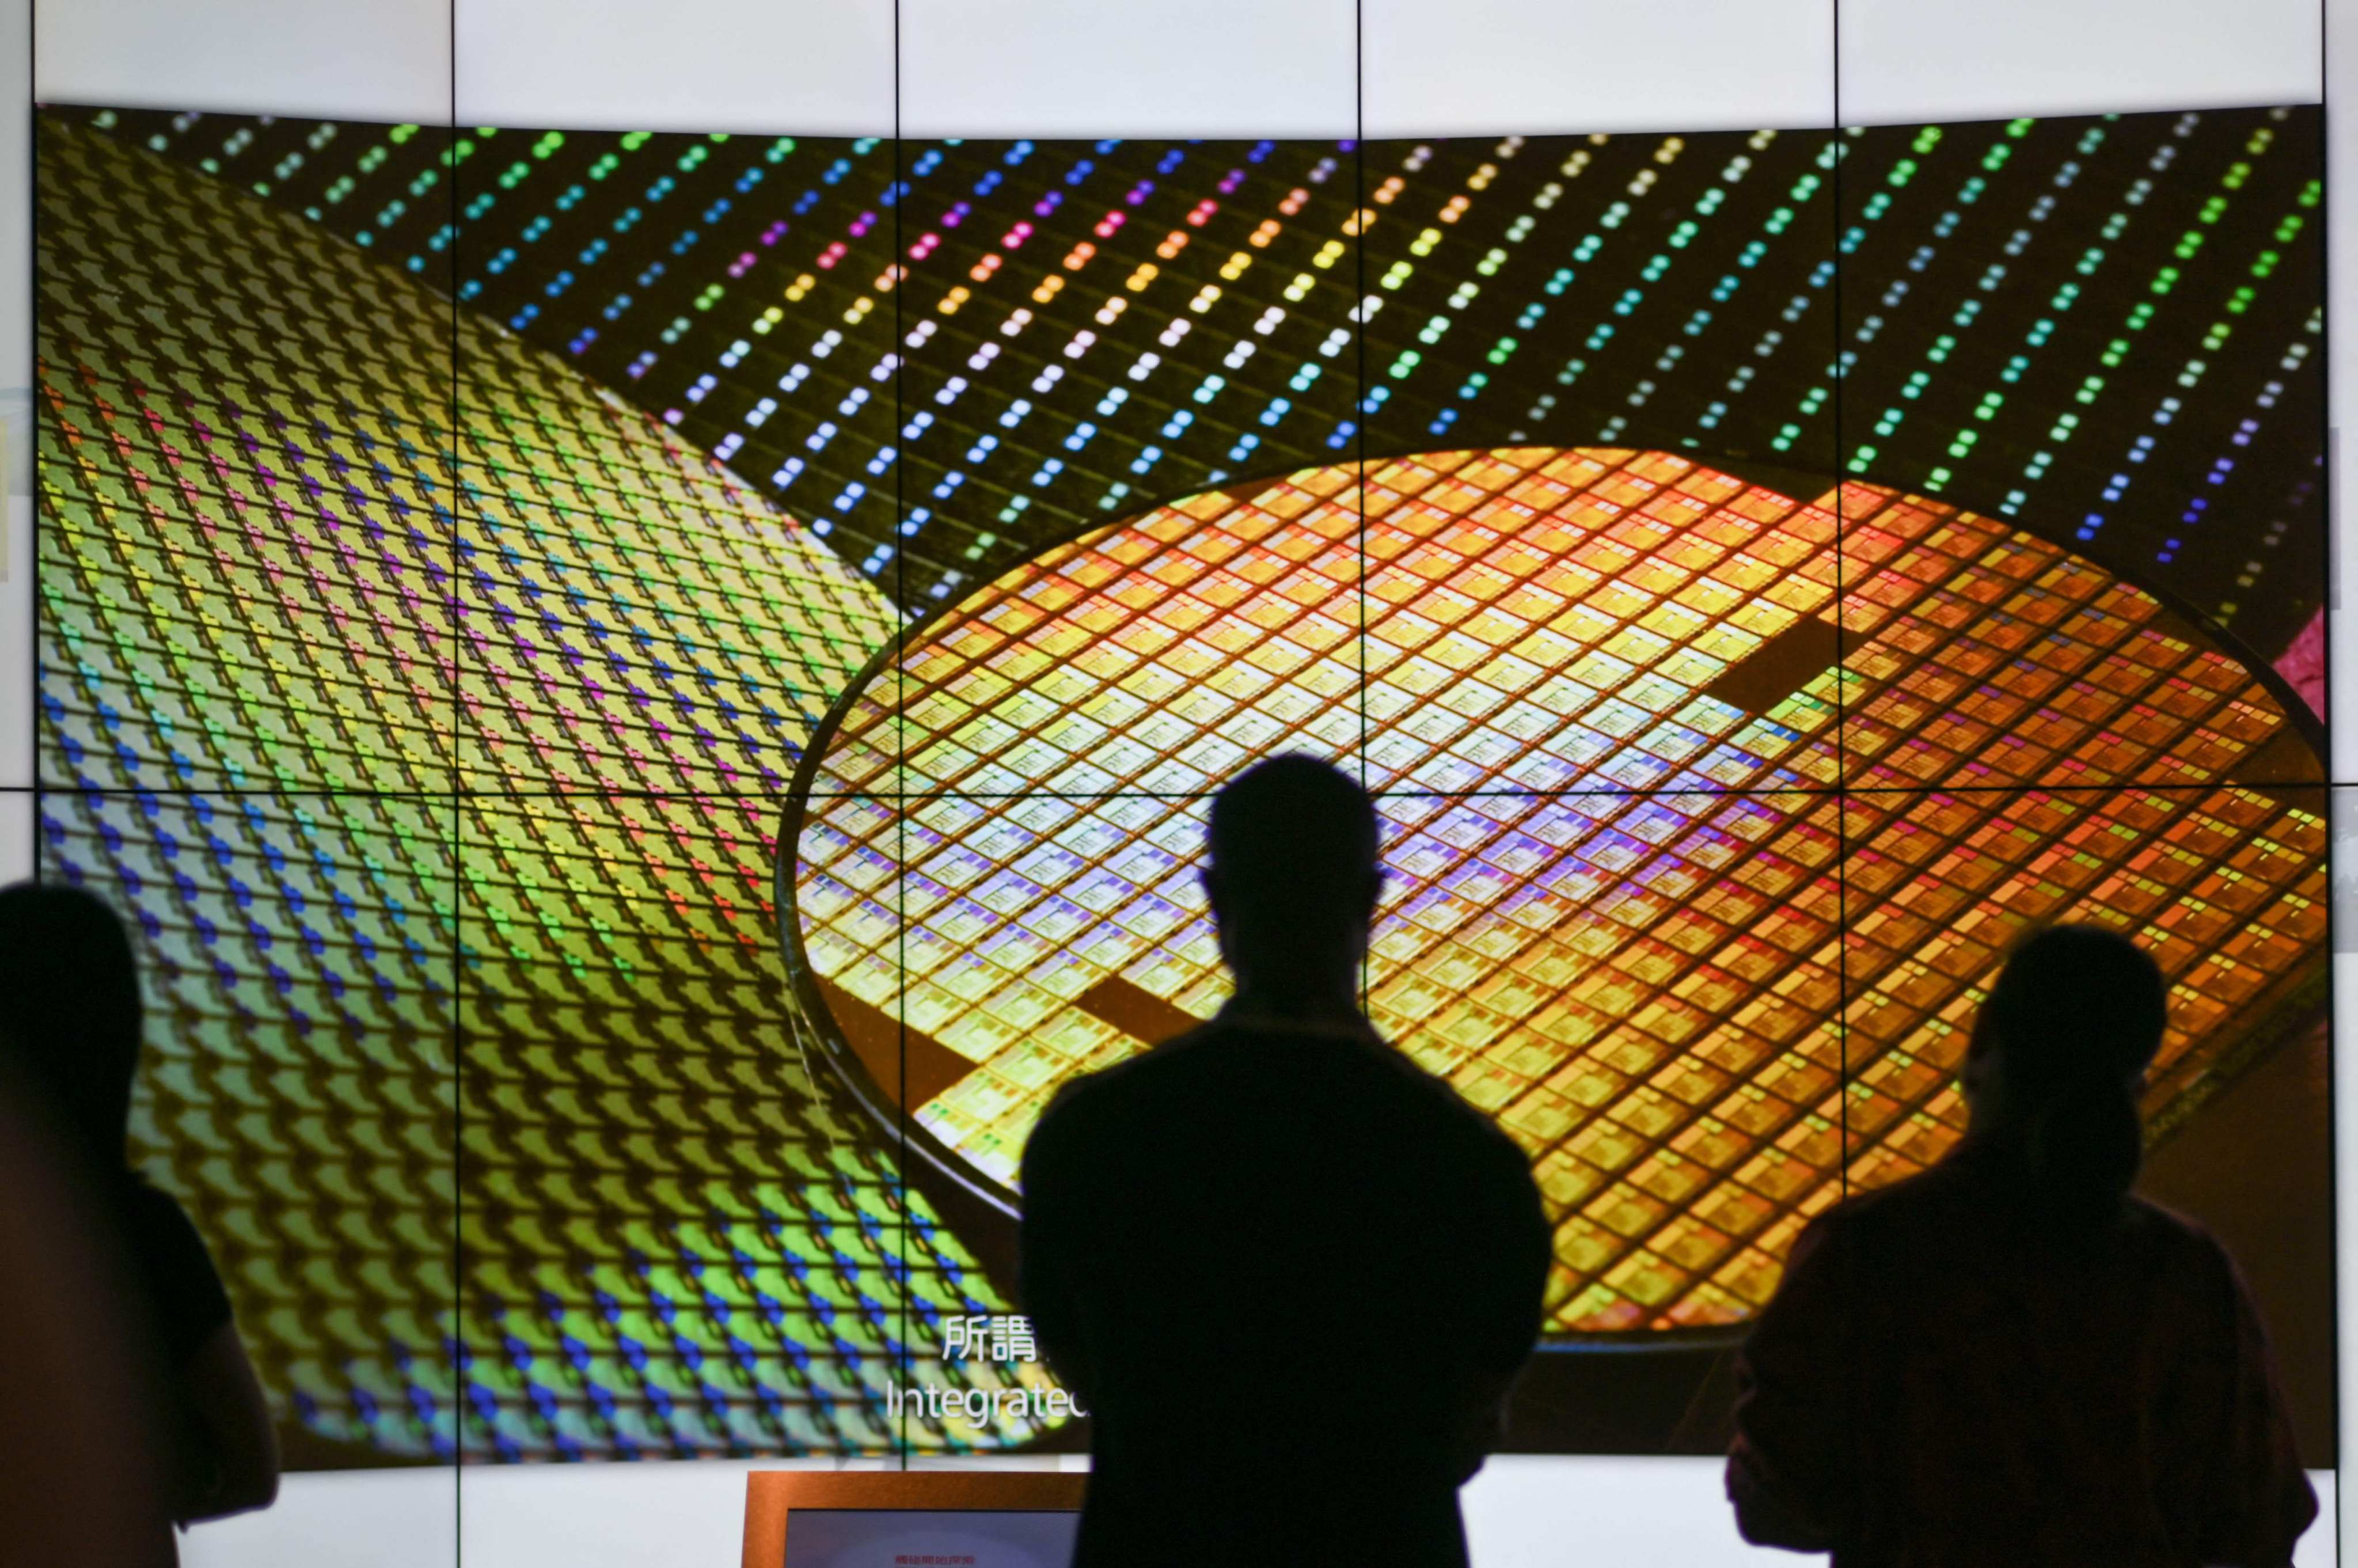 Visitors watch wafers shown on screens at the Taiwan Semiconductor Manufacturing Company Renovation Museum at the Hsinchu Science Park in Hsinchu, Taiwan, on July 5. The escalating tech war between the United States and China is likely to intensify as semiconductors become an increasingly essential part of the global economy. Photo: AFP